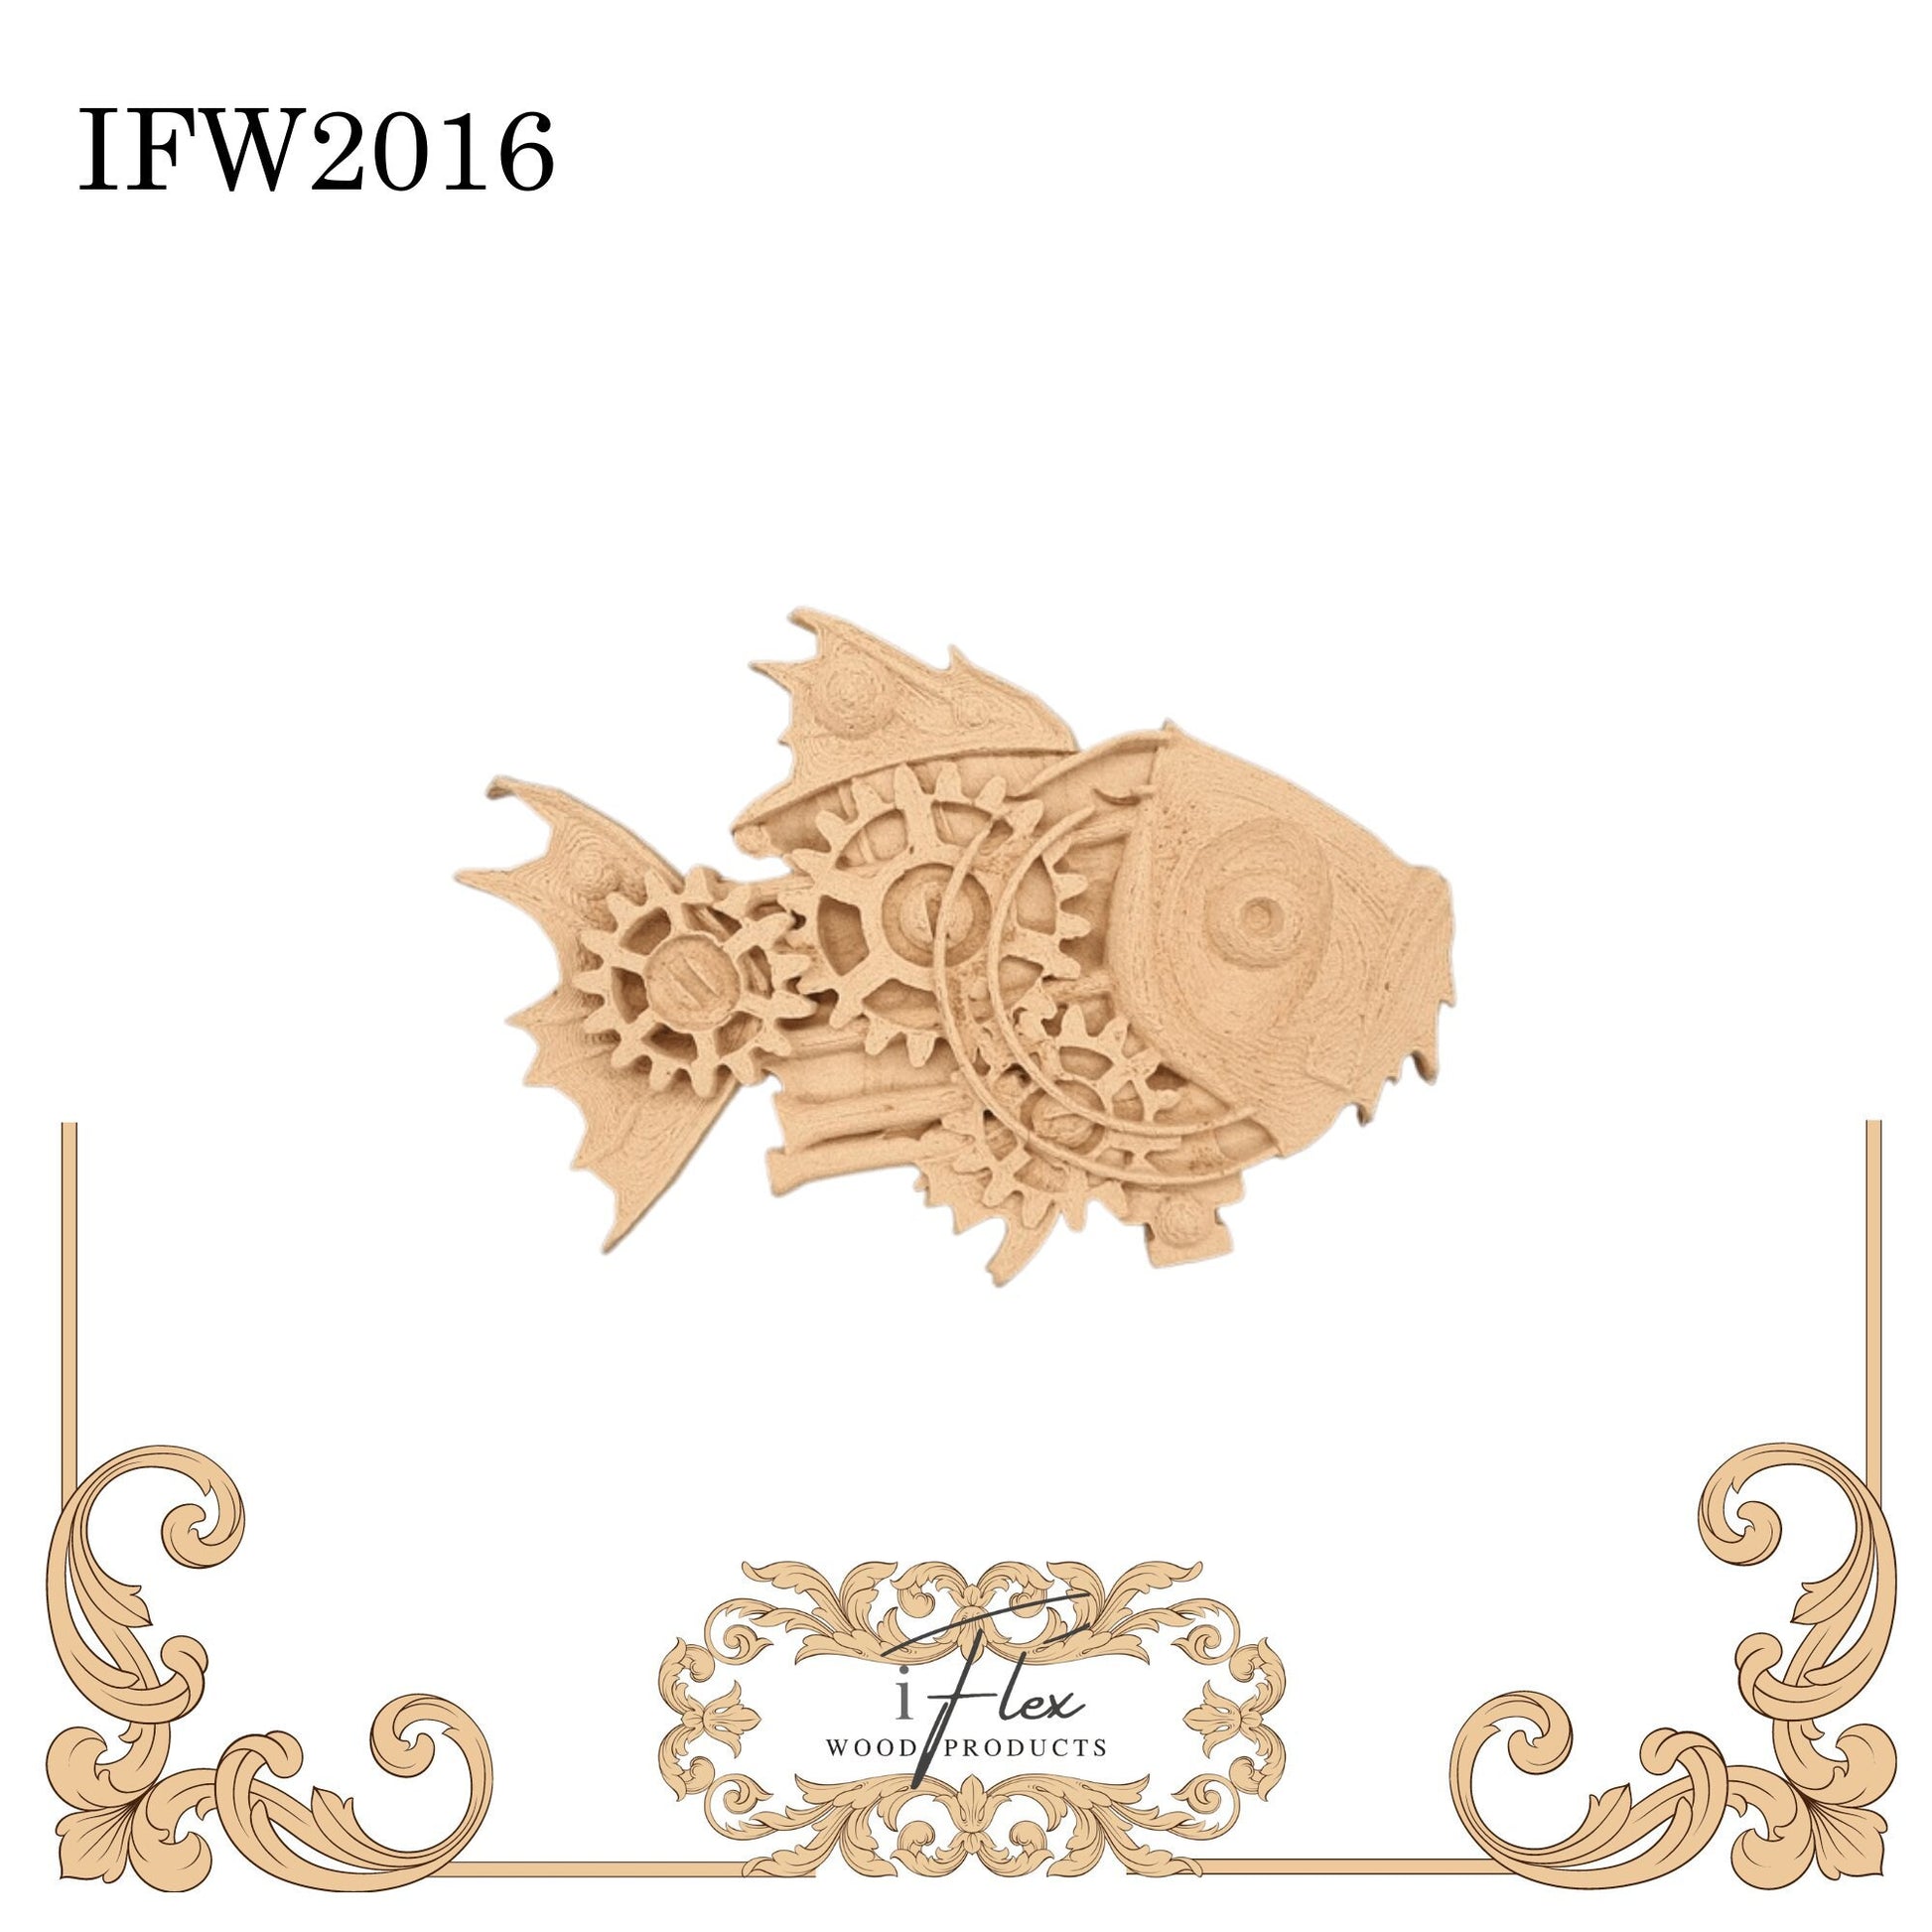 IFW 2016 iFlex Wood Products, bendable mouldings, flexible, wooden appliques, steampunk, fish, animal